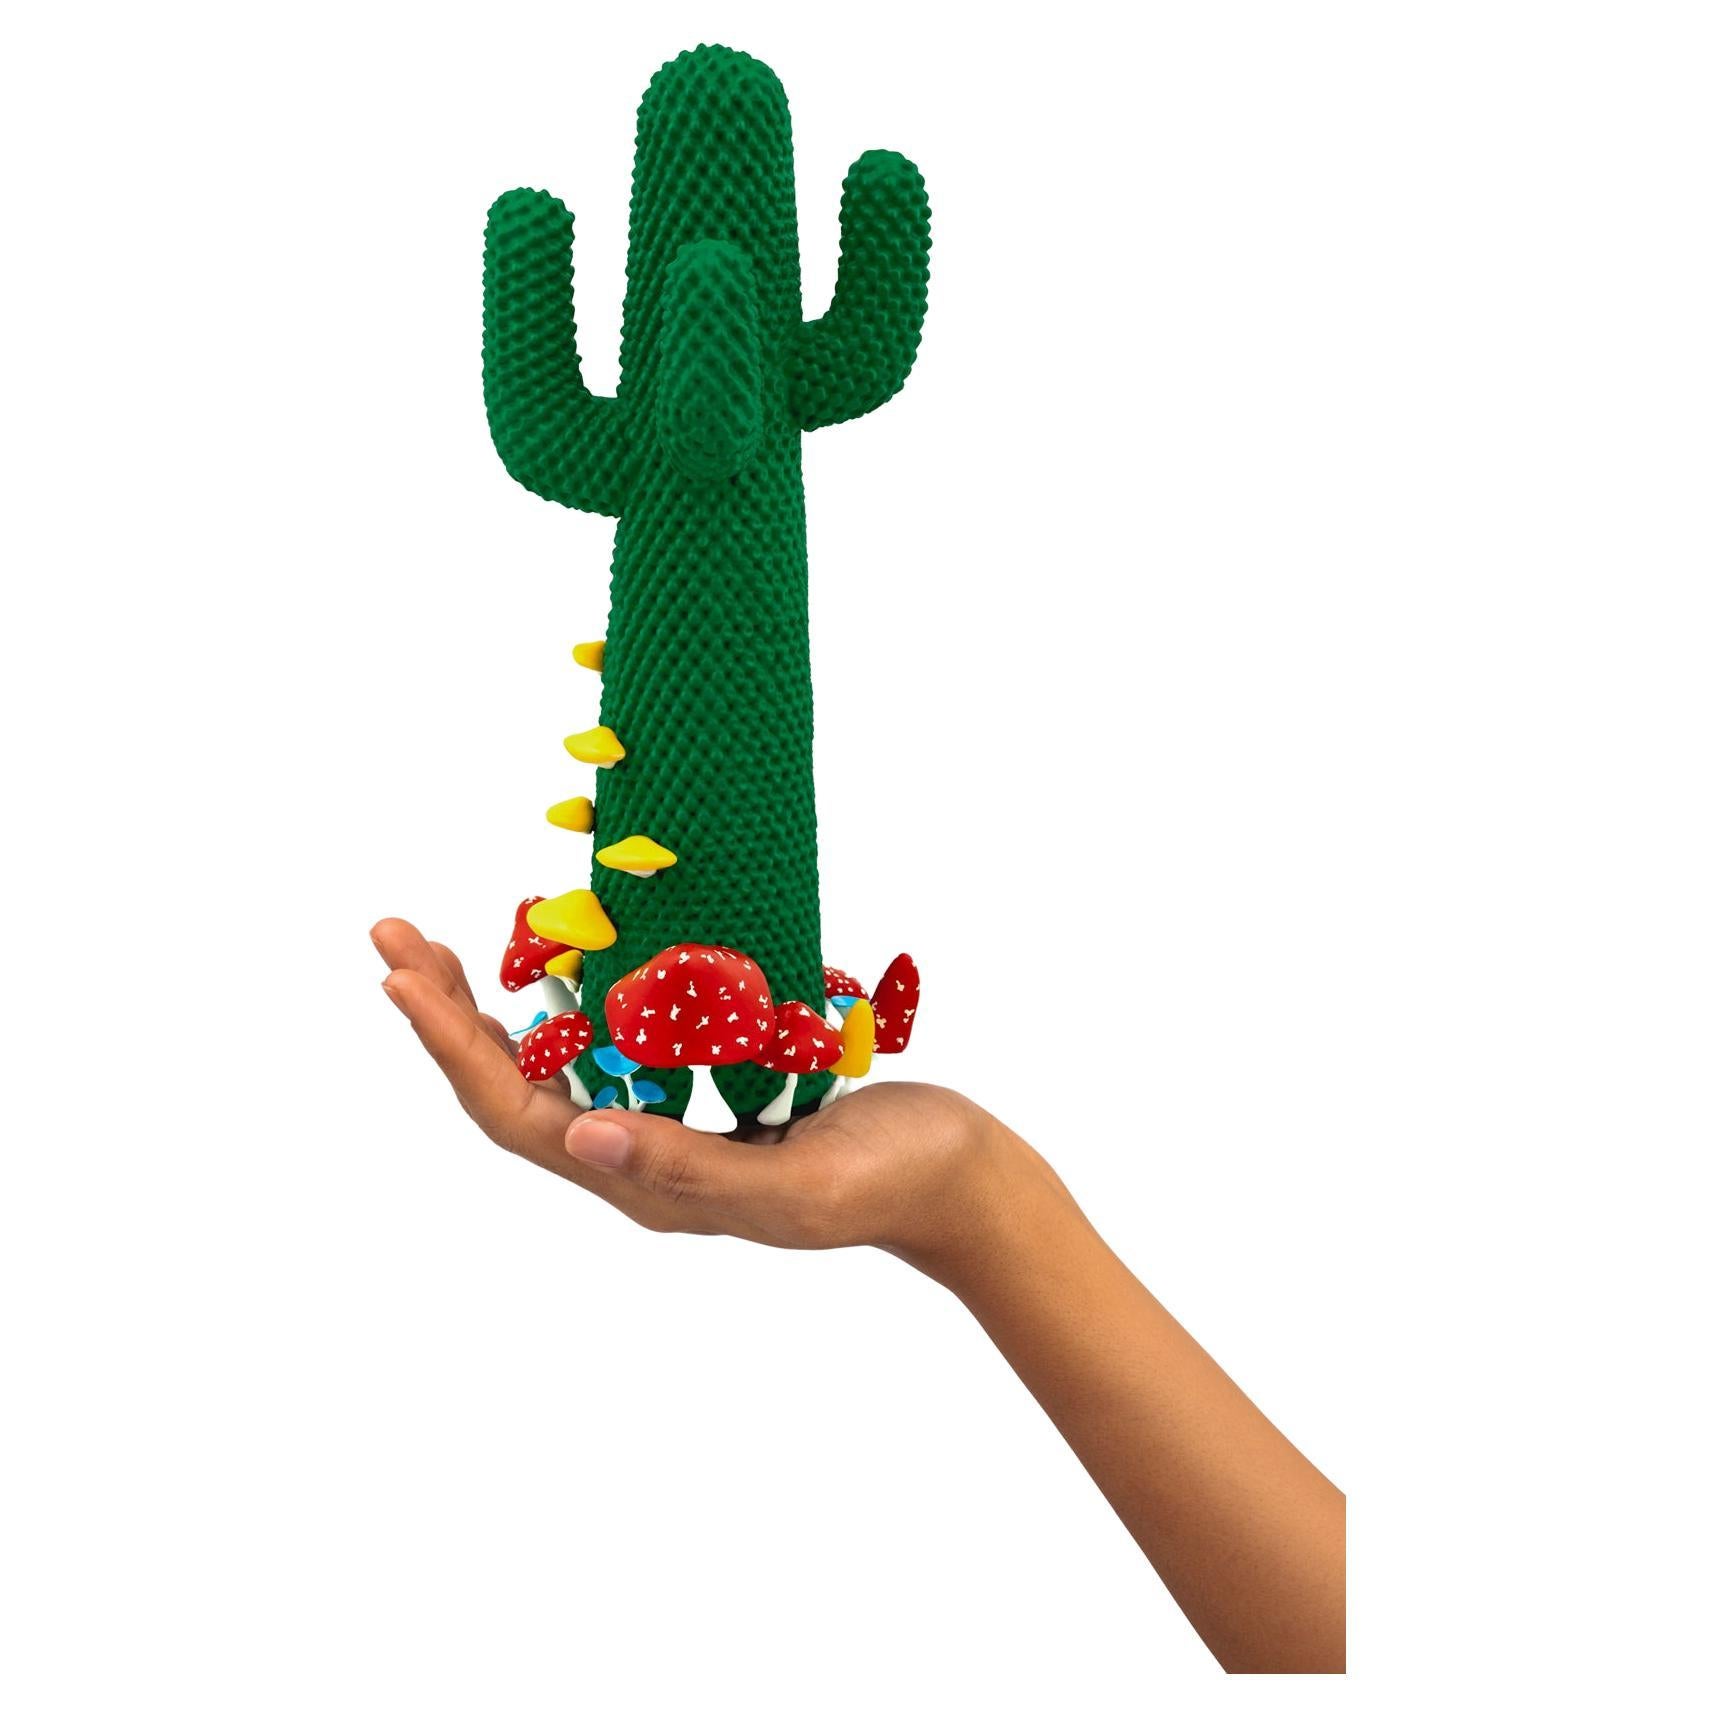 LIMITED EDITION #34/99

Gufram presents the miniaturised version of the Shroom CACTUS® created in collaboration with A$AP Rocky and the artist’s new design studio HOMMEMADE Exactly as the real-size Shroom CACTUS®, the new Guframini piece features